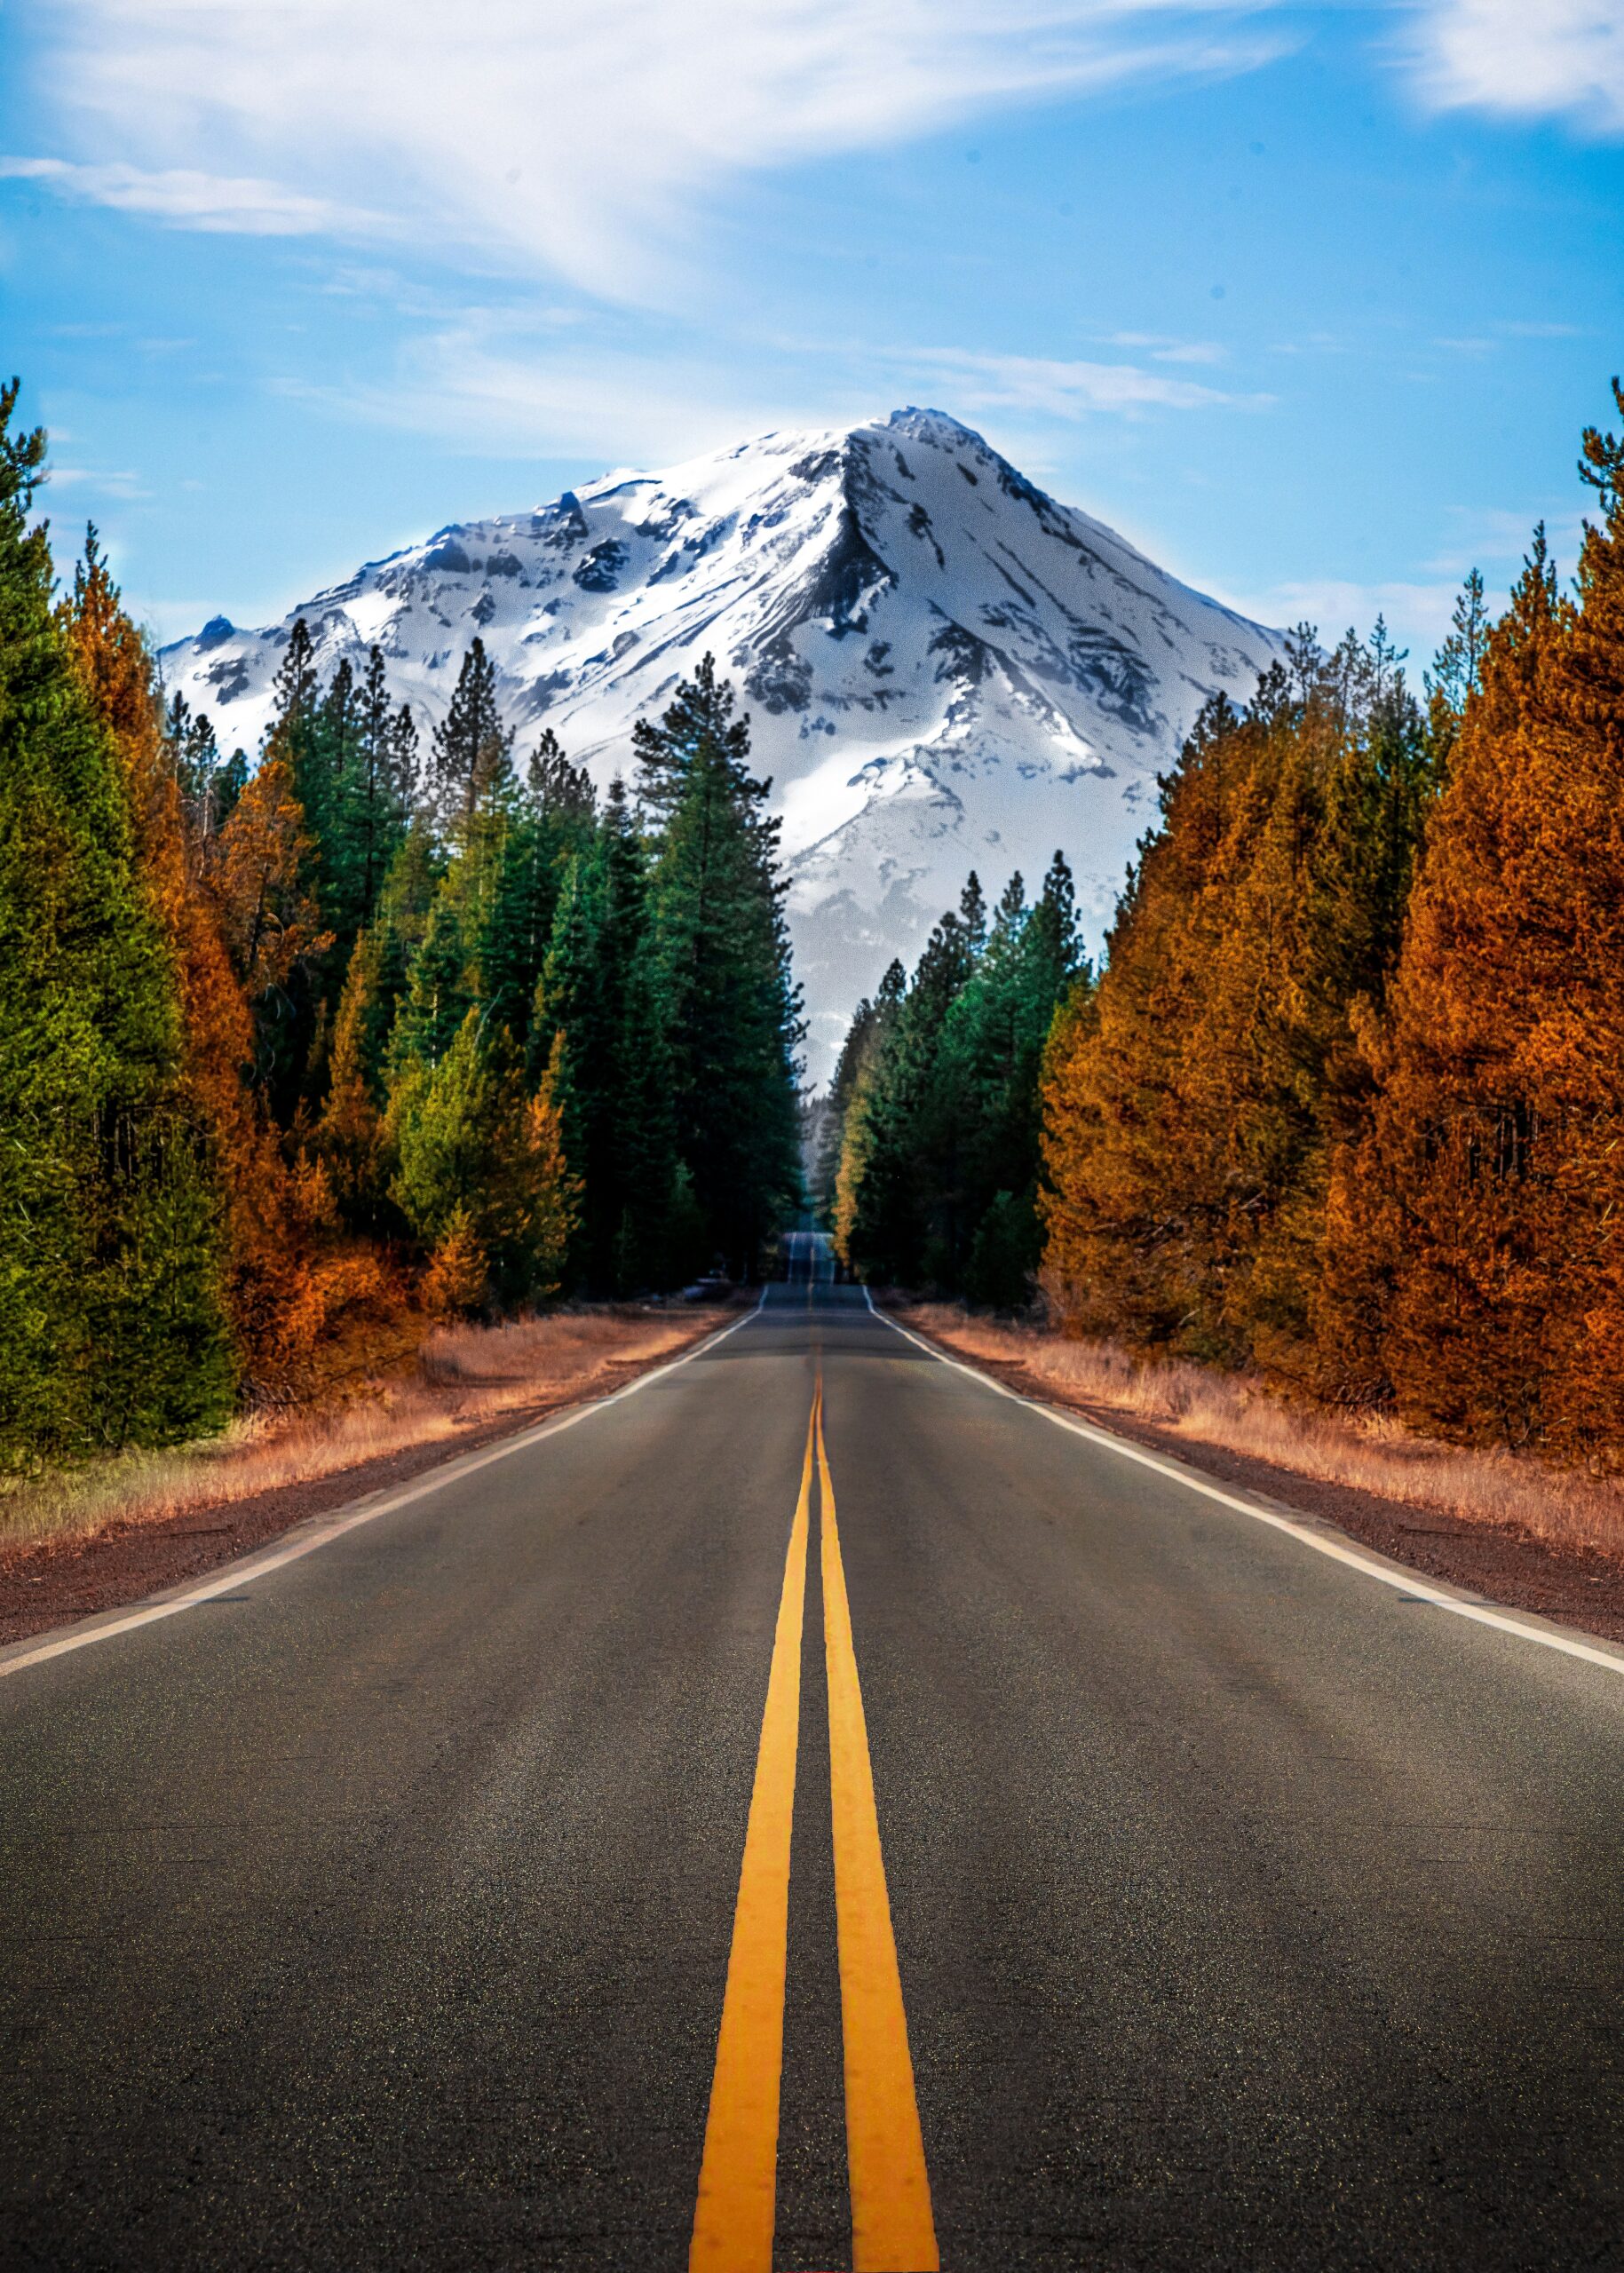 What Should I Do In Case Of An Emergency On Mount Shasta?